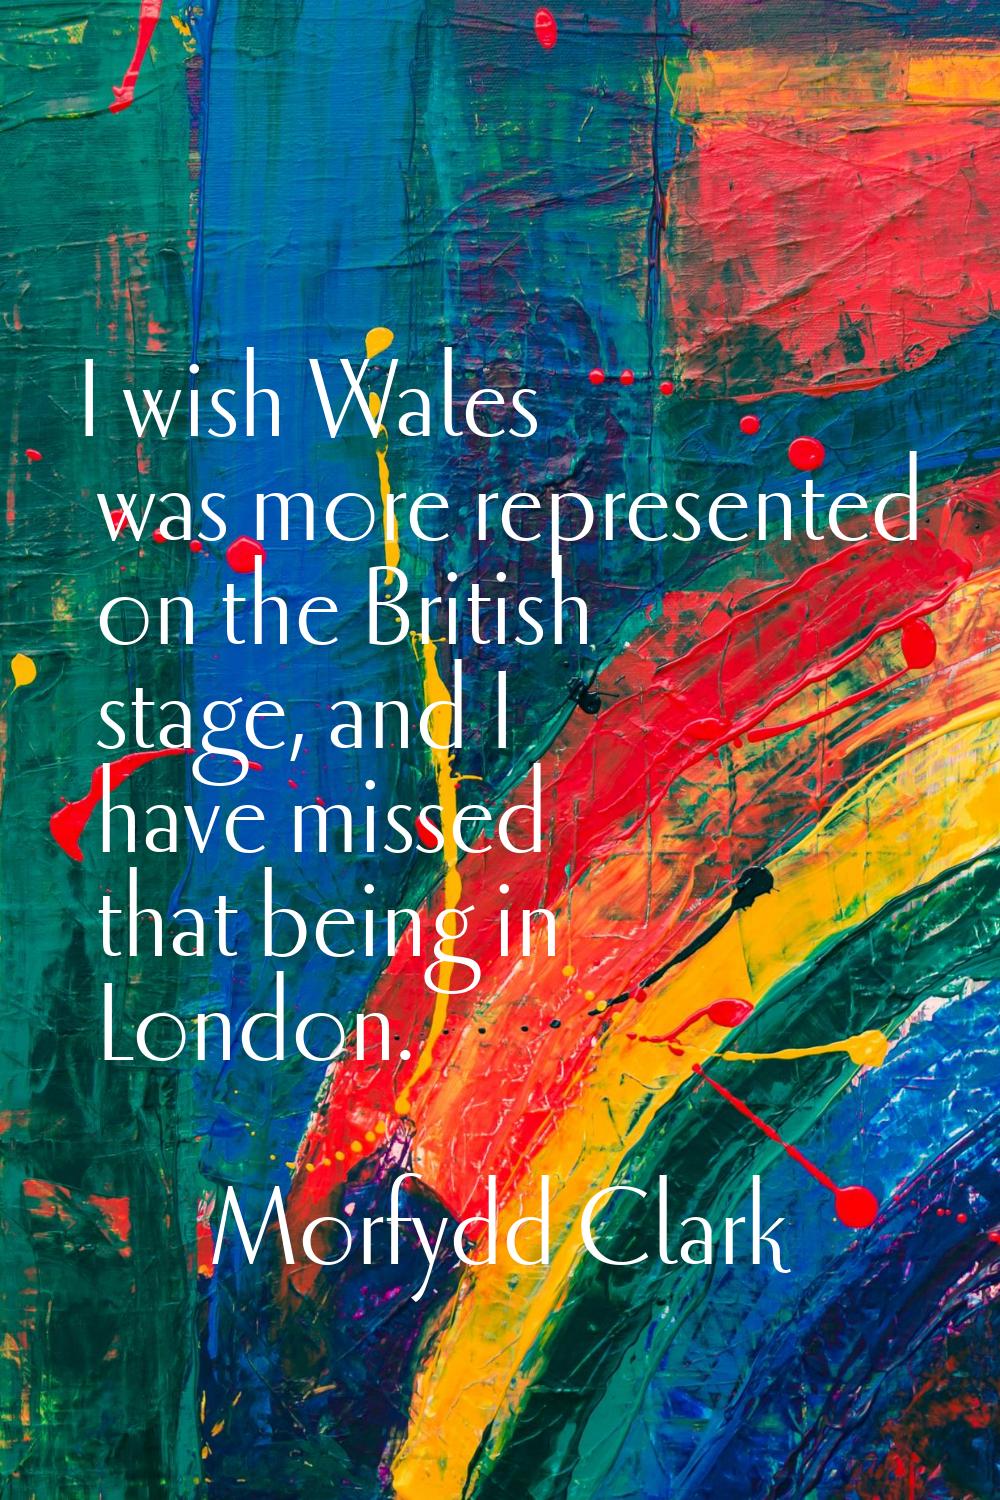 I wish Wales was more represented on the British stage, and I have missed that being in London.